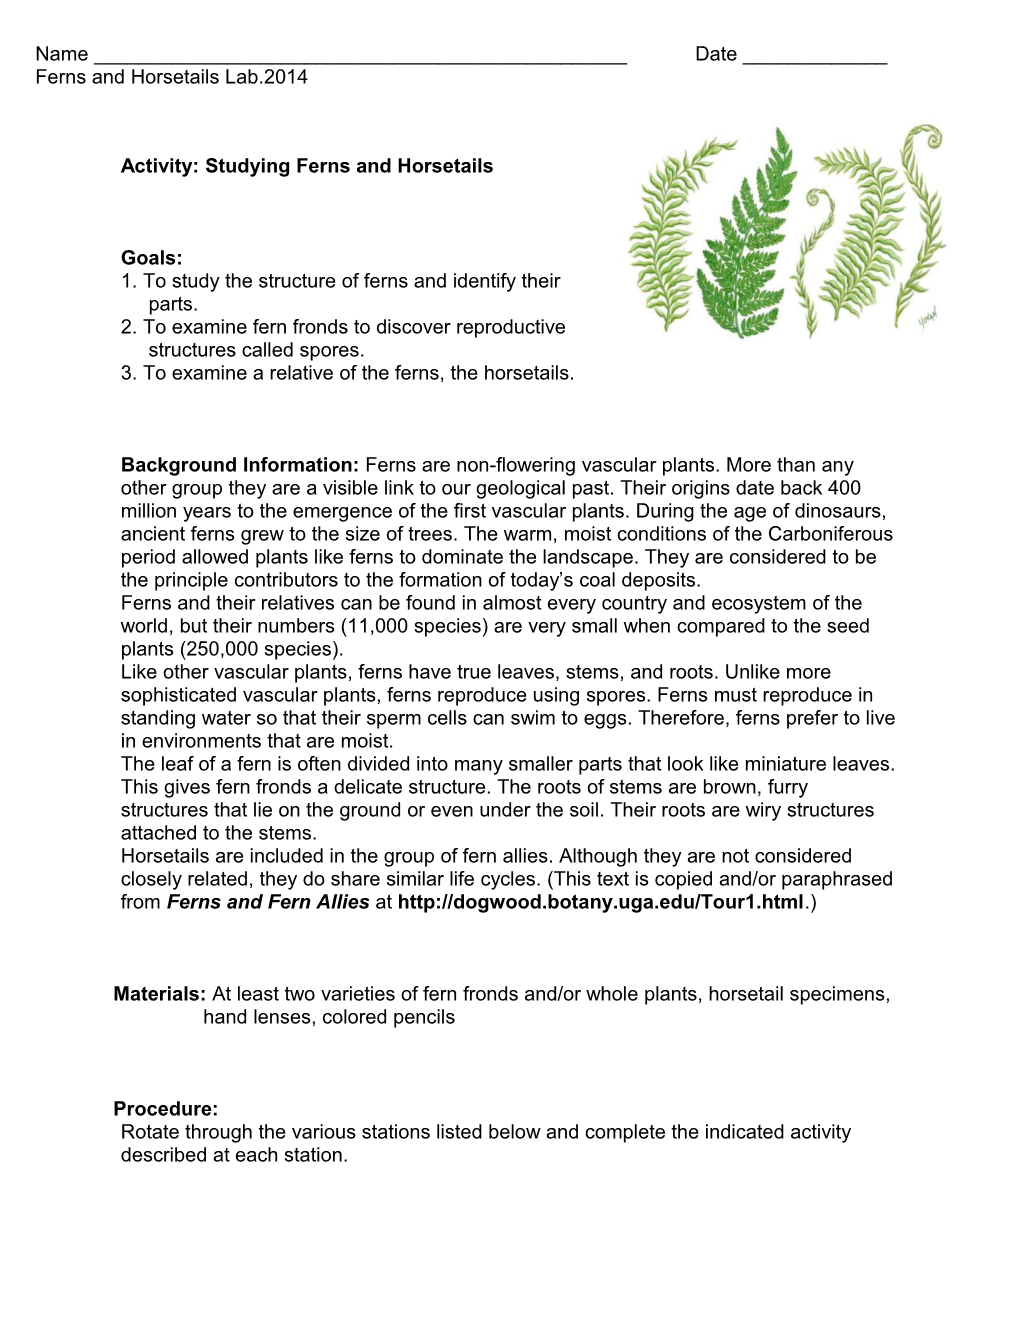 1. to Study the Structure of Ferns and Identify Their